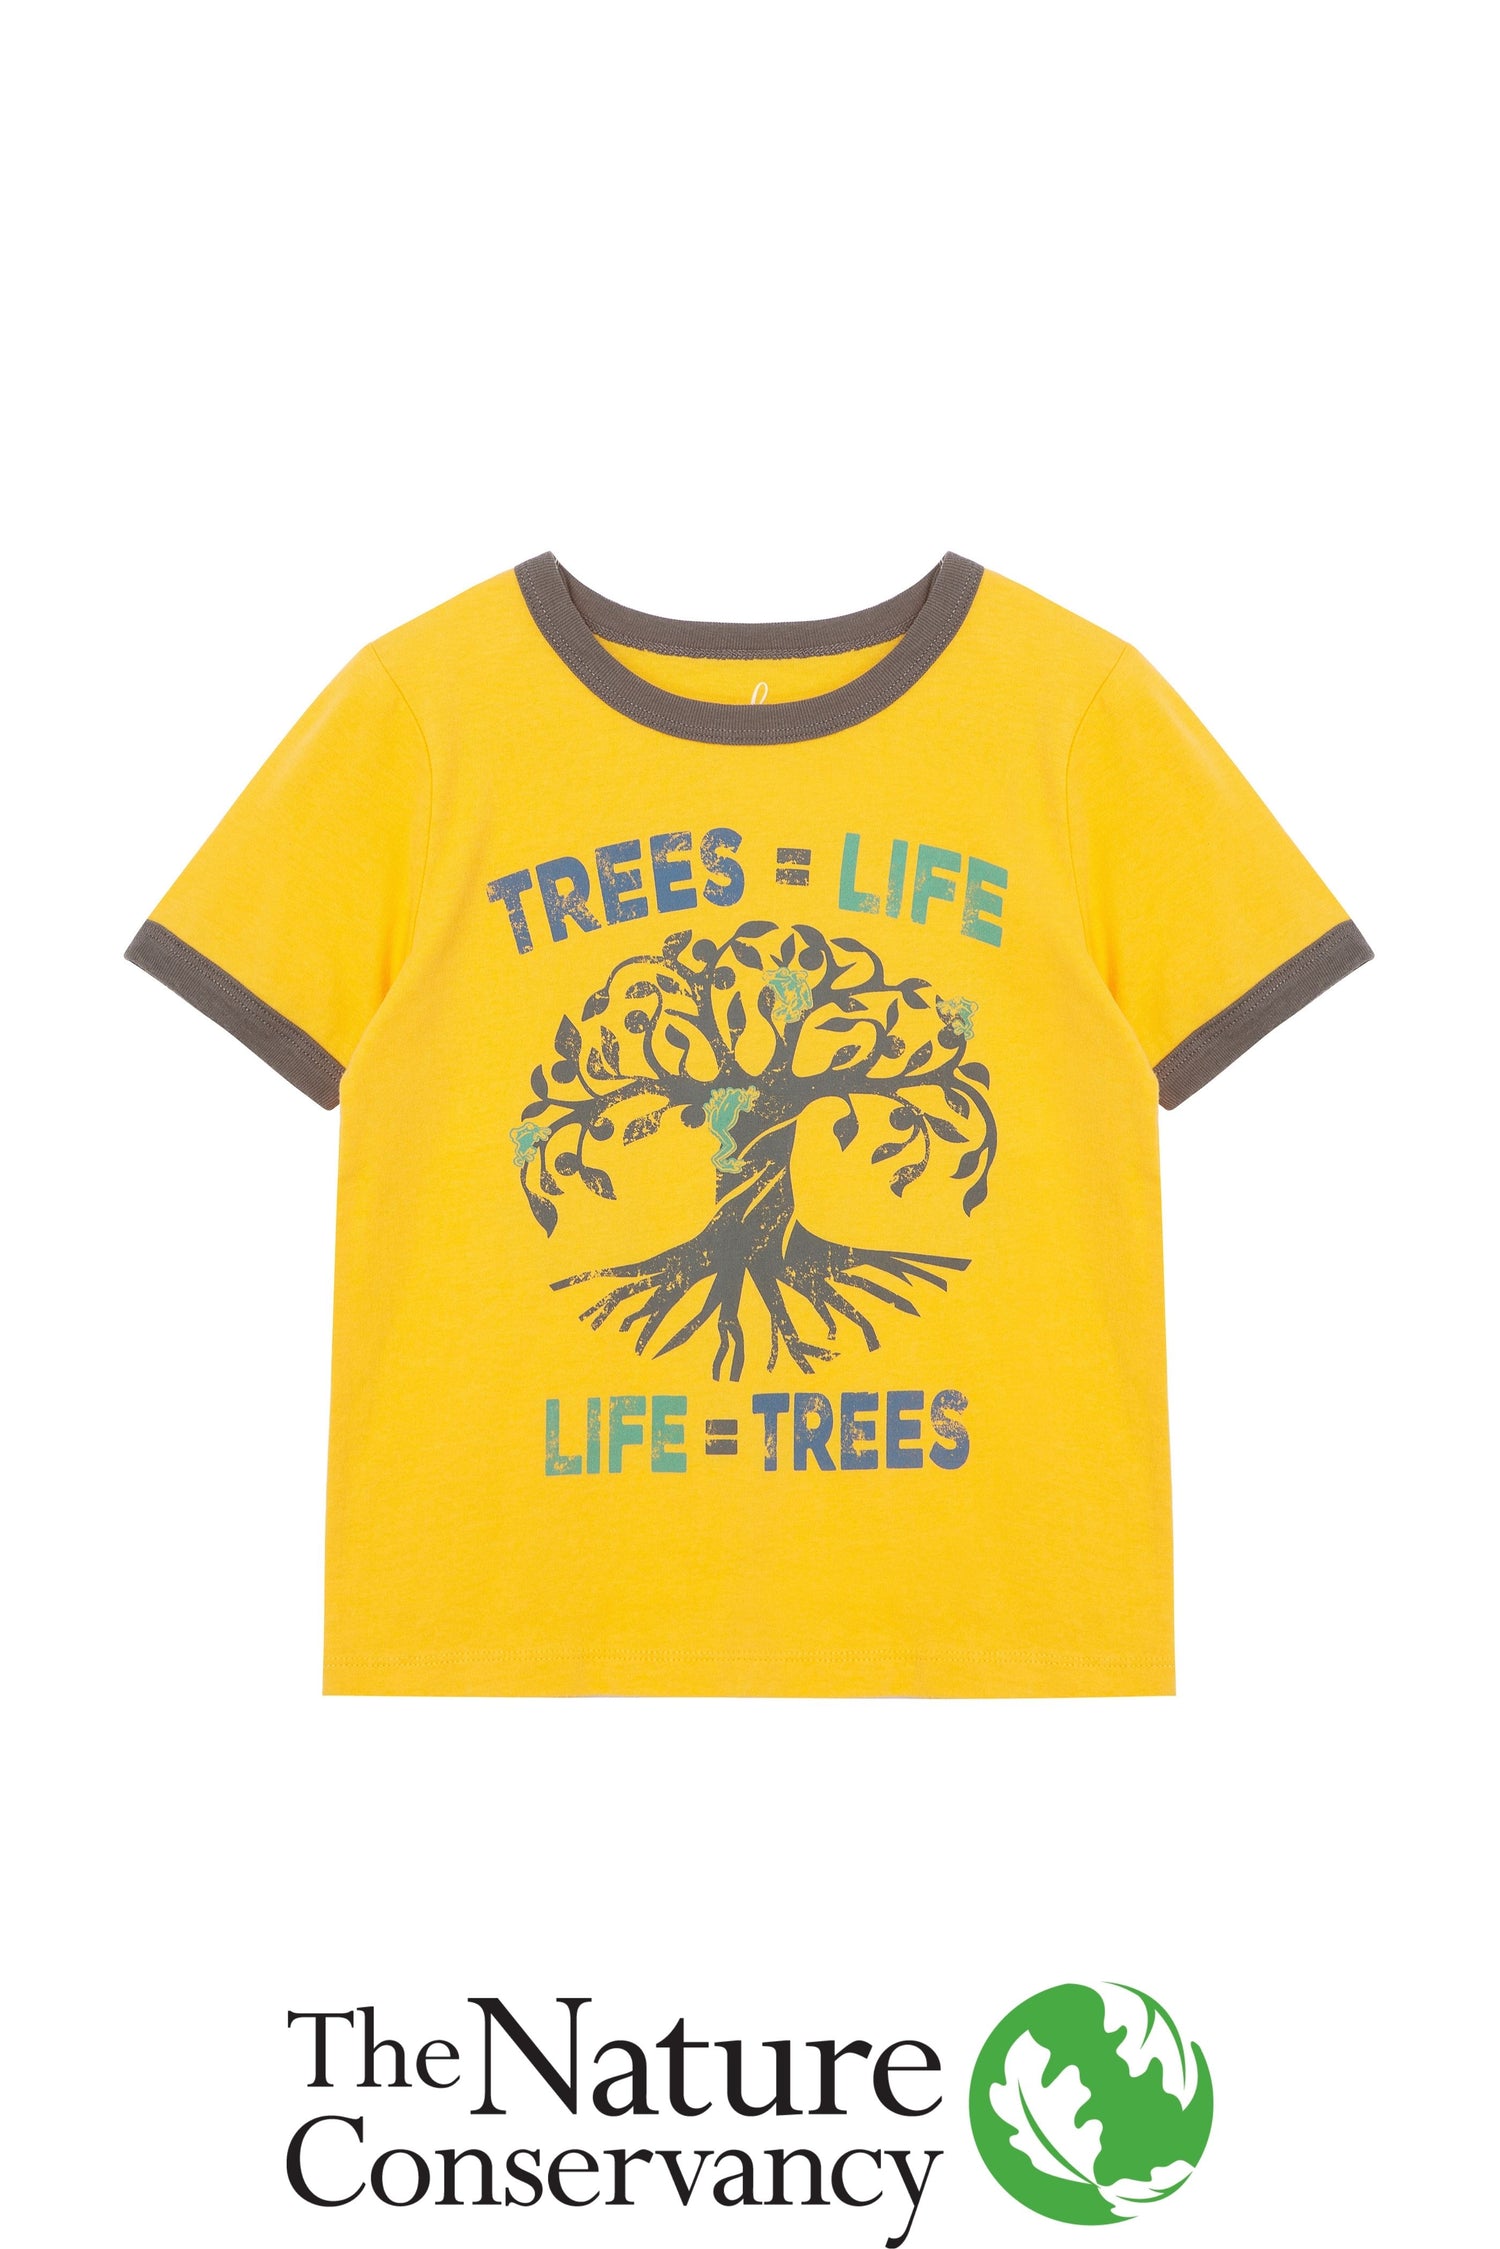 Yellow and brown t-shirt with illustrated tree and 'trees = life life = trees' text